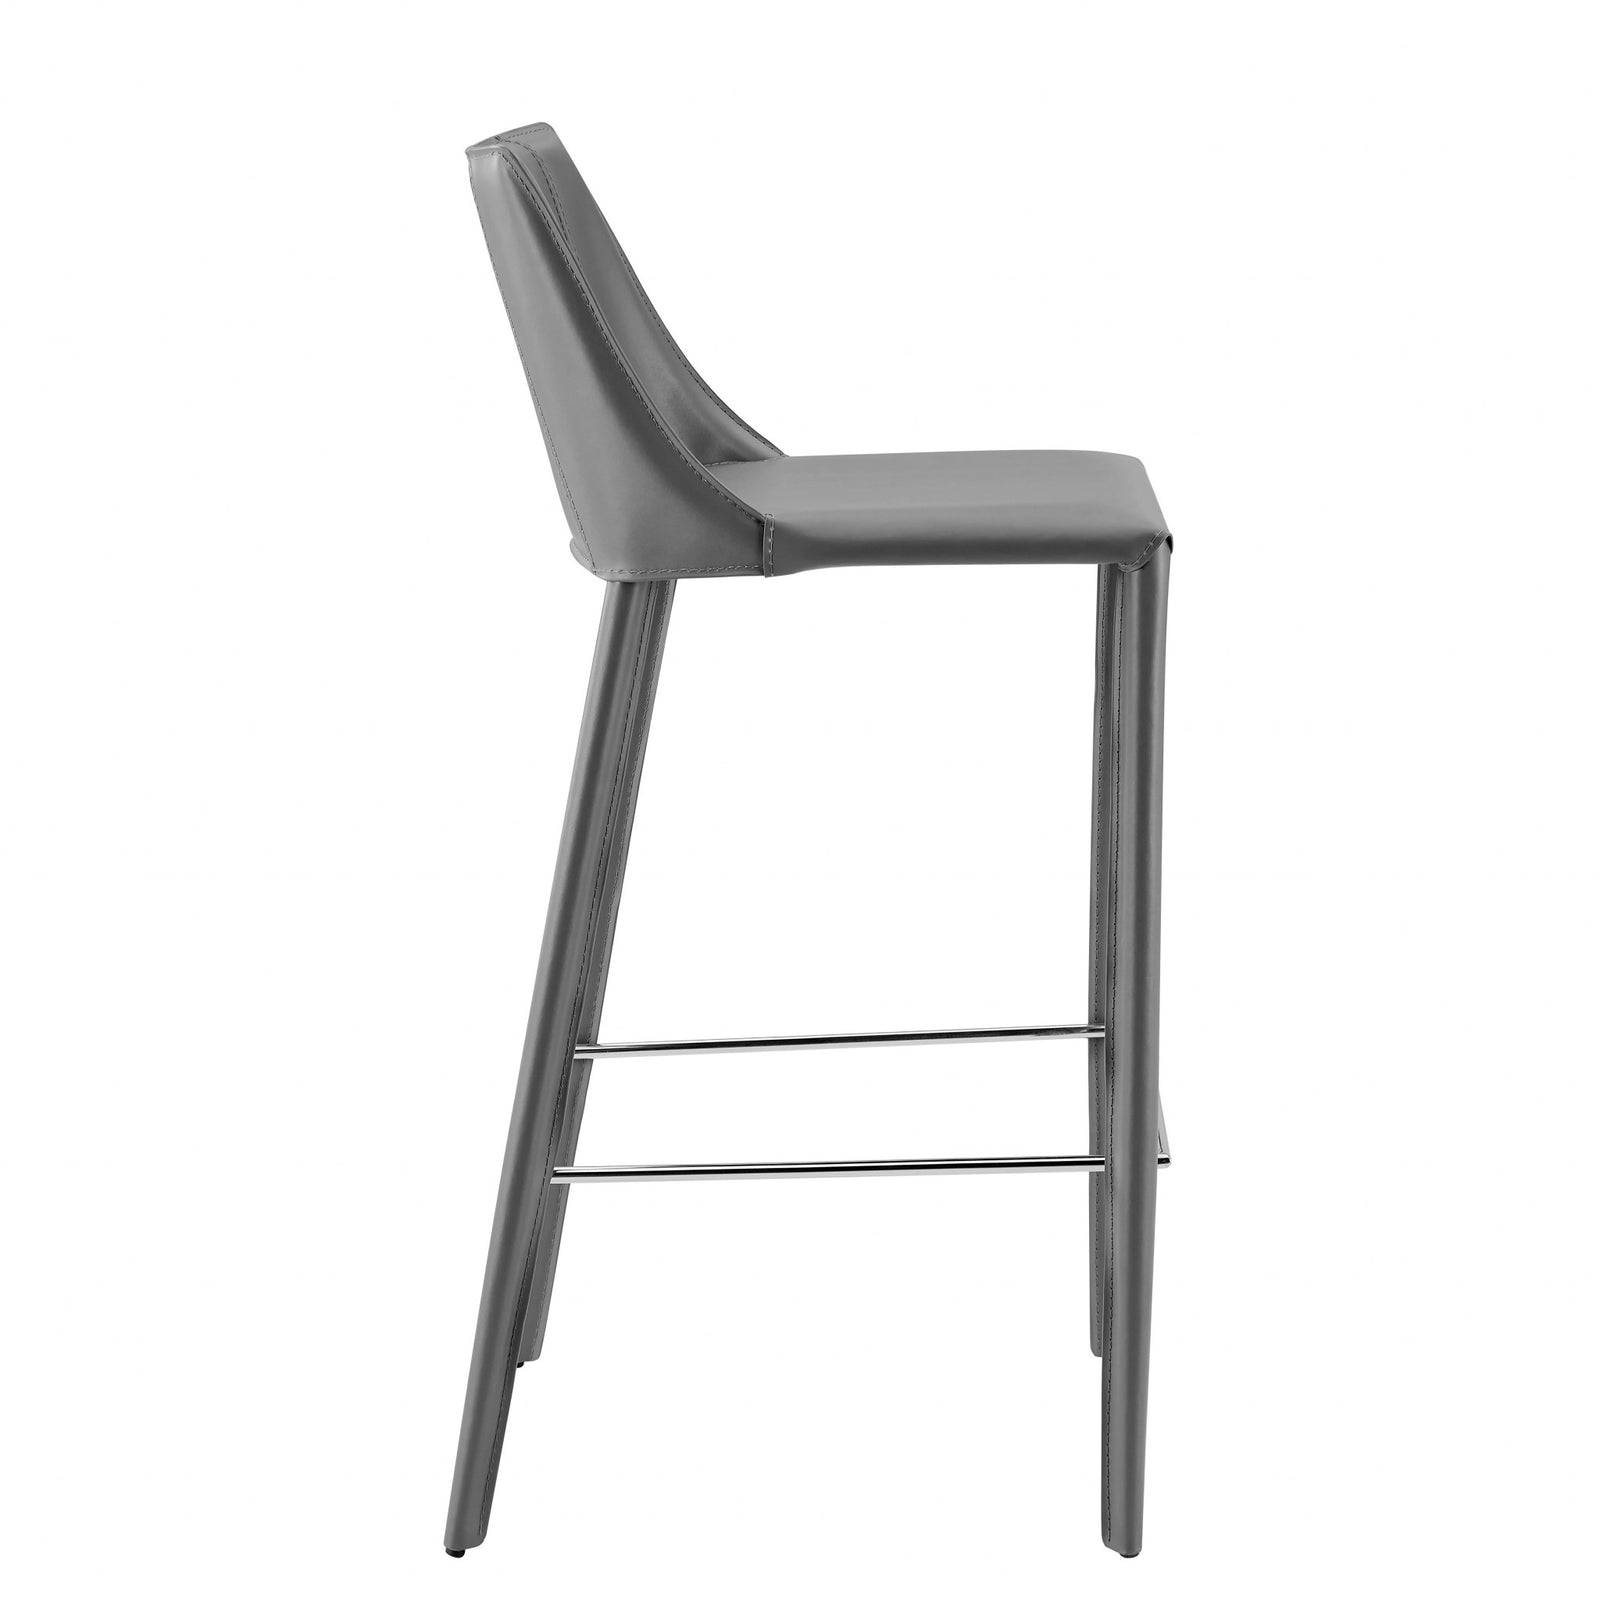 40" Gray Steel Low Back Bar Height Chair With Footrest